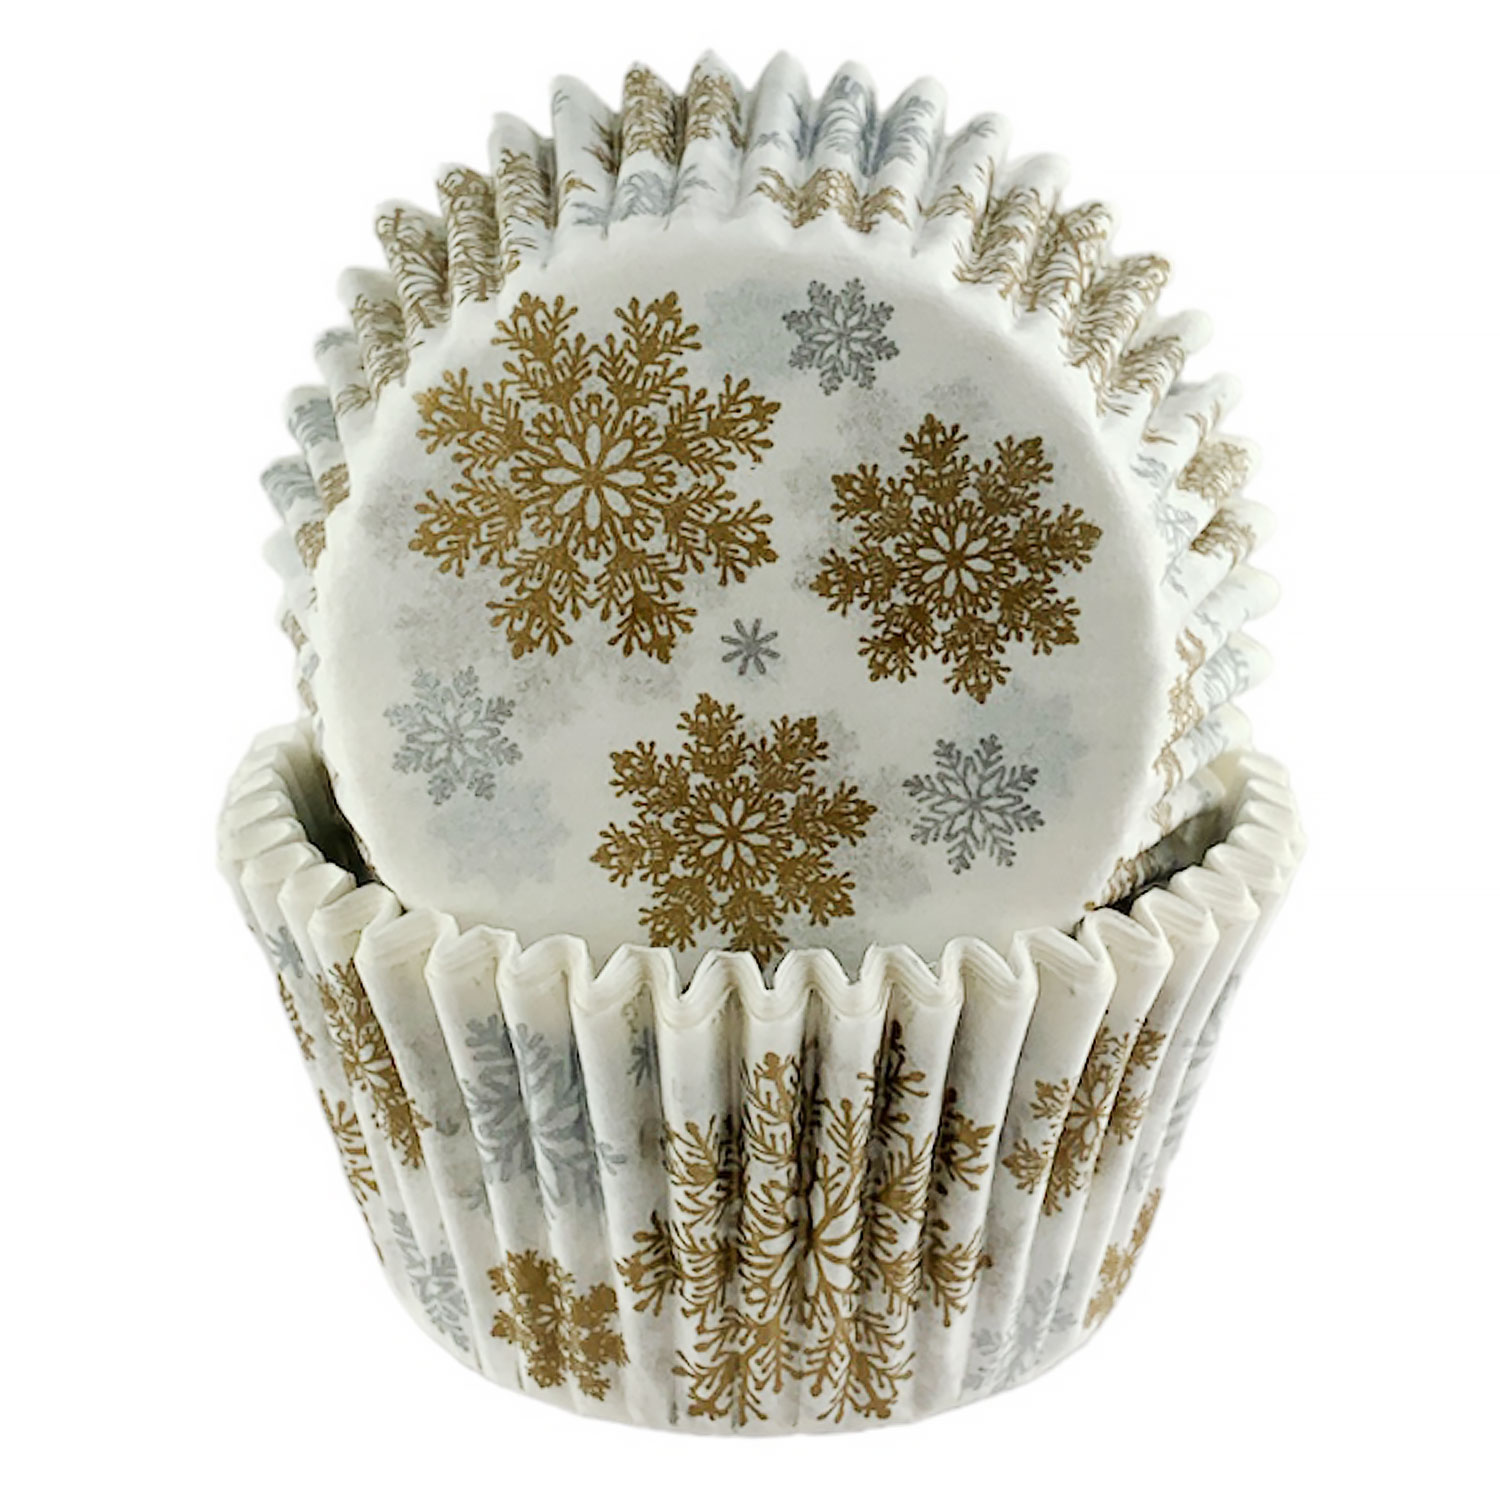 Silver & Gold Snowflakes Cupcake Liners